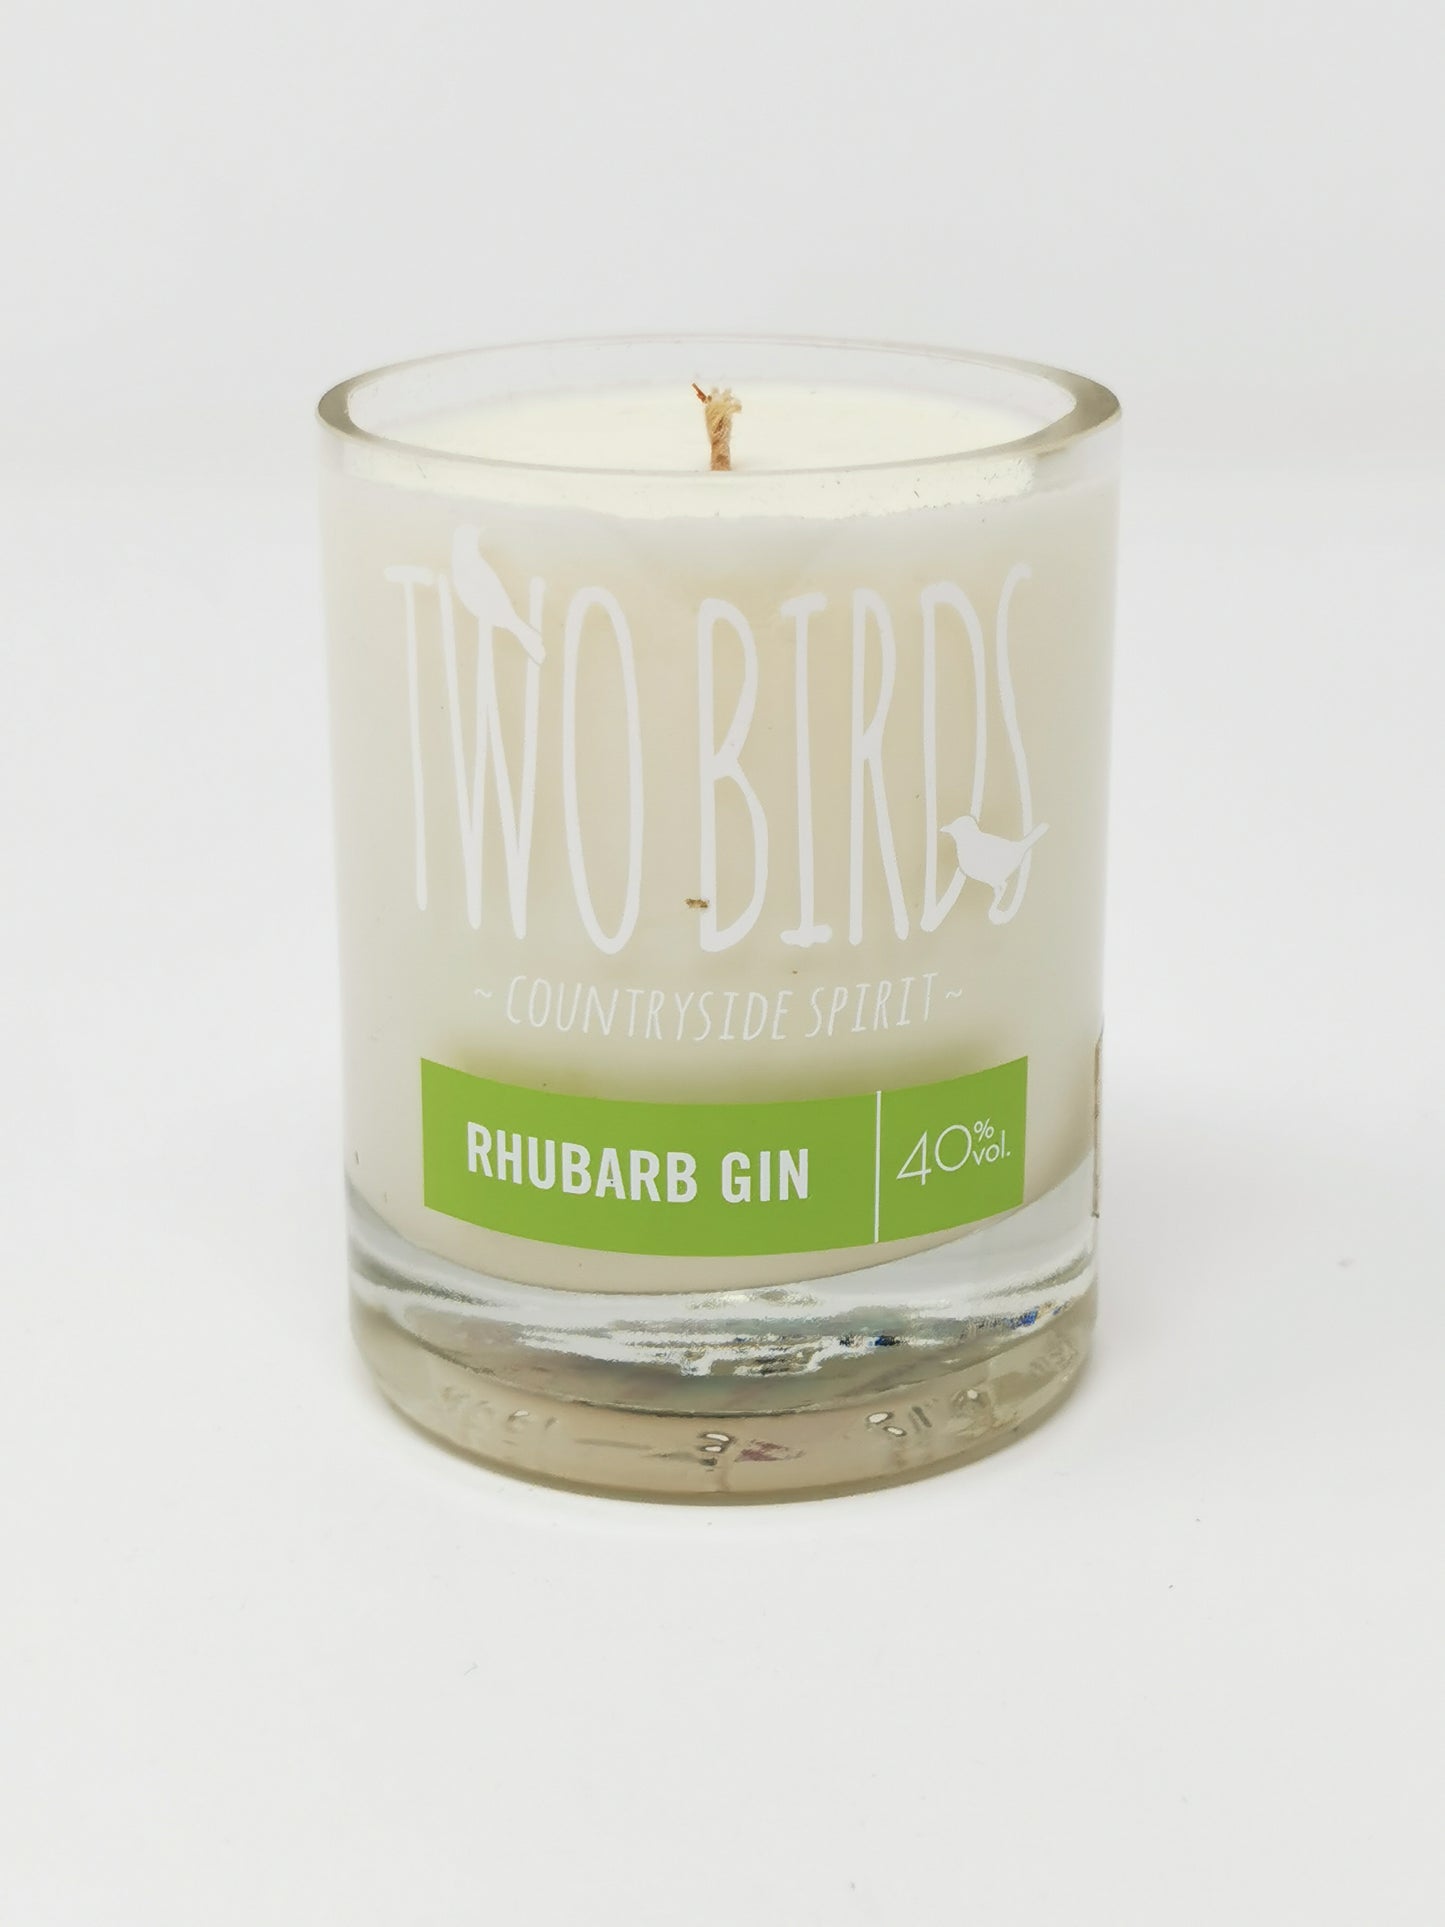 Two Birds Rhubarb Gin Bottle Candle-Gin Bottle Candles-Adhock Homeware